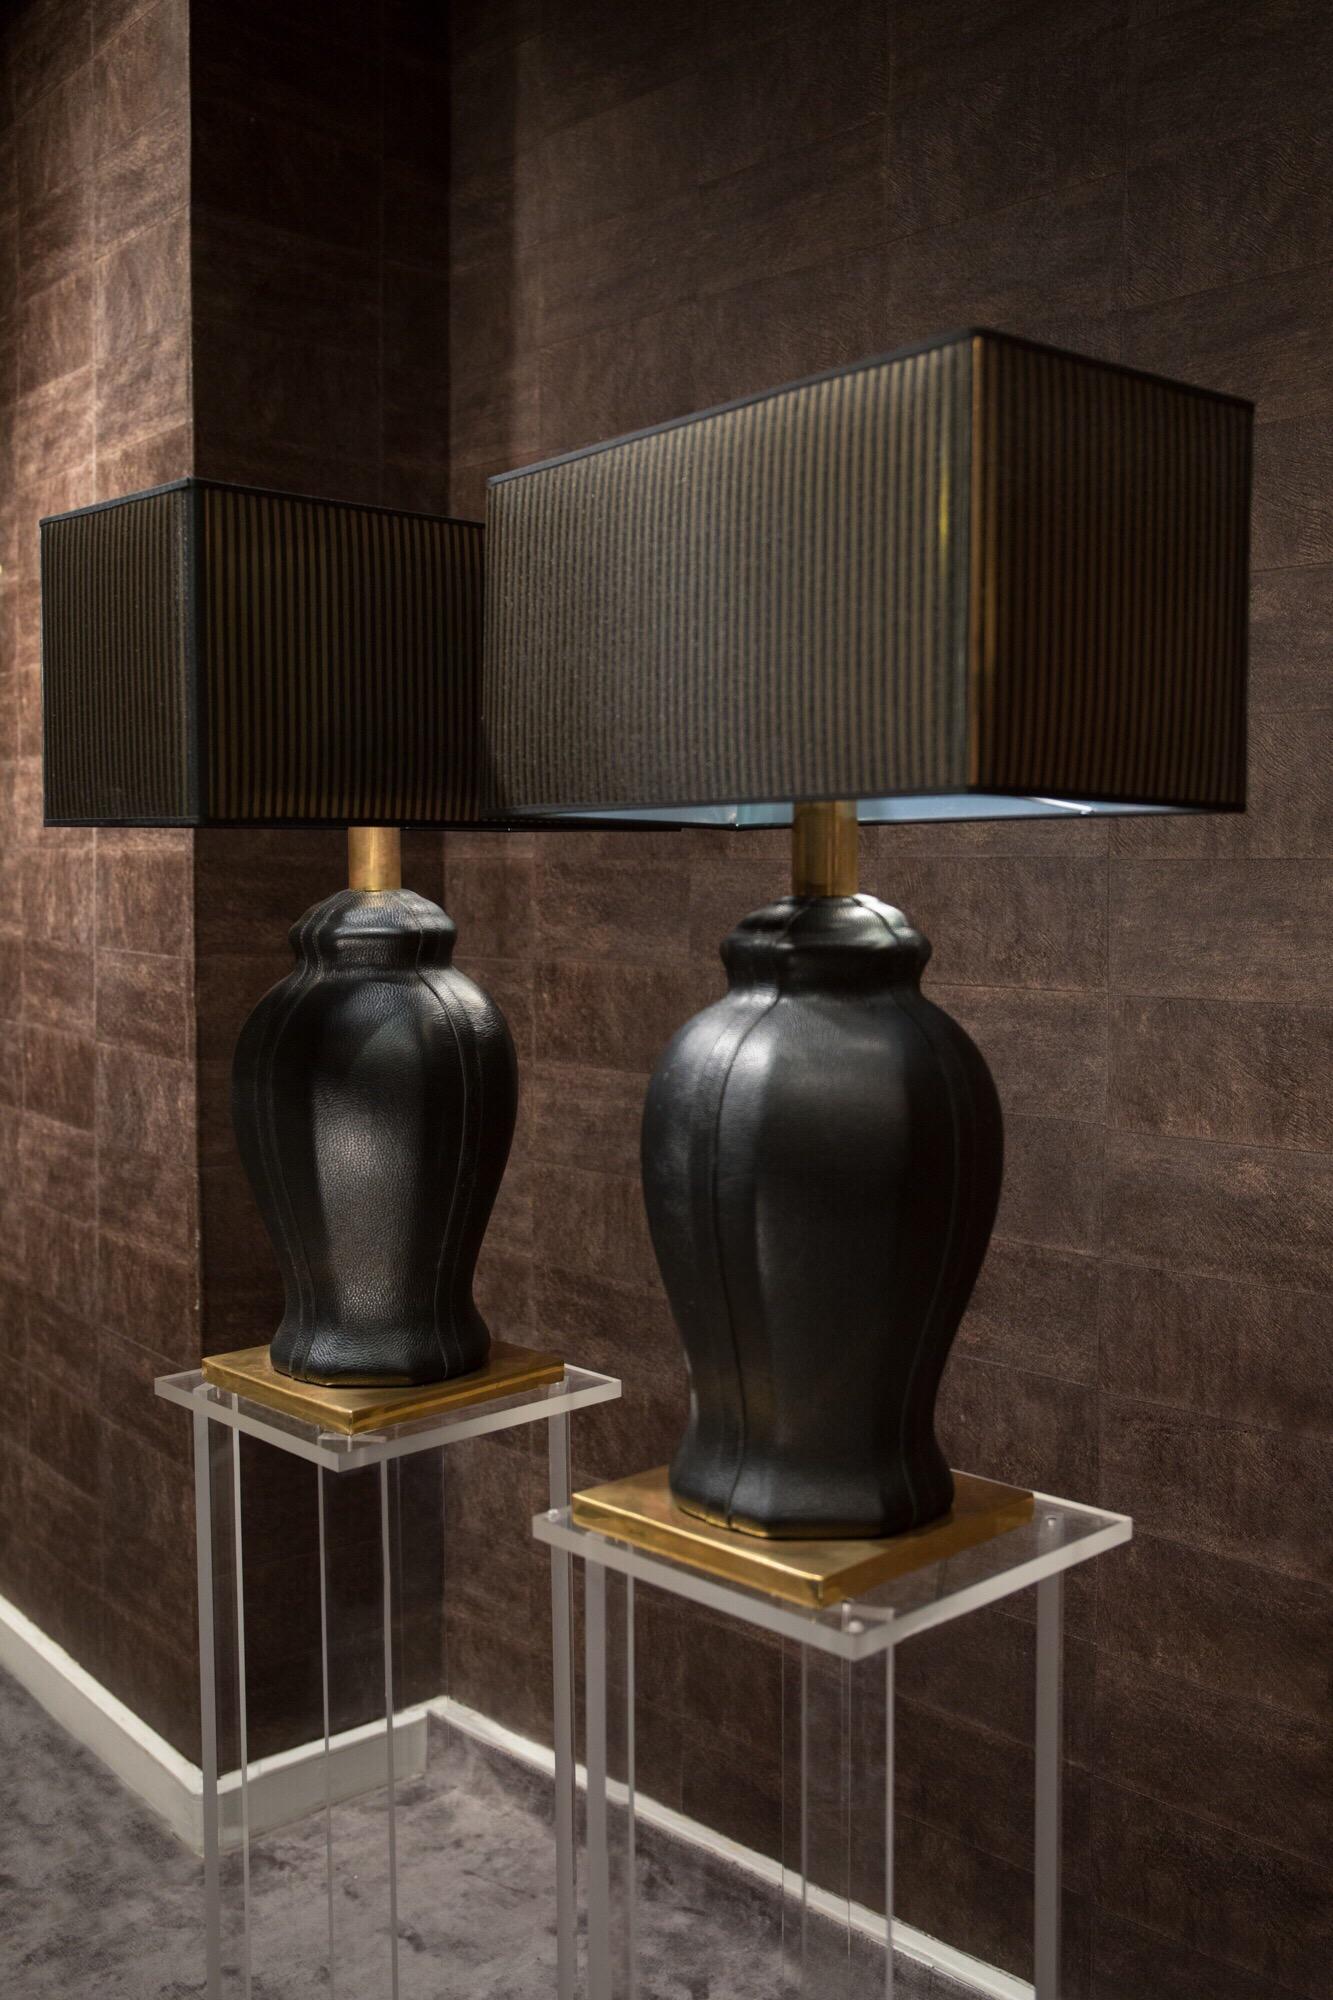 In addition to their very beautiful shapes, what characterizes this set of two lamps, is their prestigious black leather coating.
The base is made in gilt brass.
The unique atmosphere produced by the two lamps is due also to the fabric and